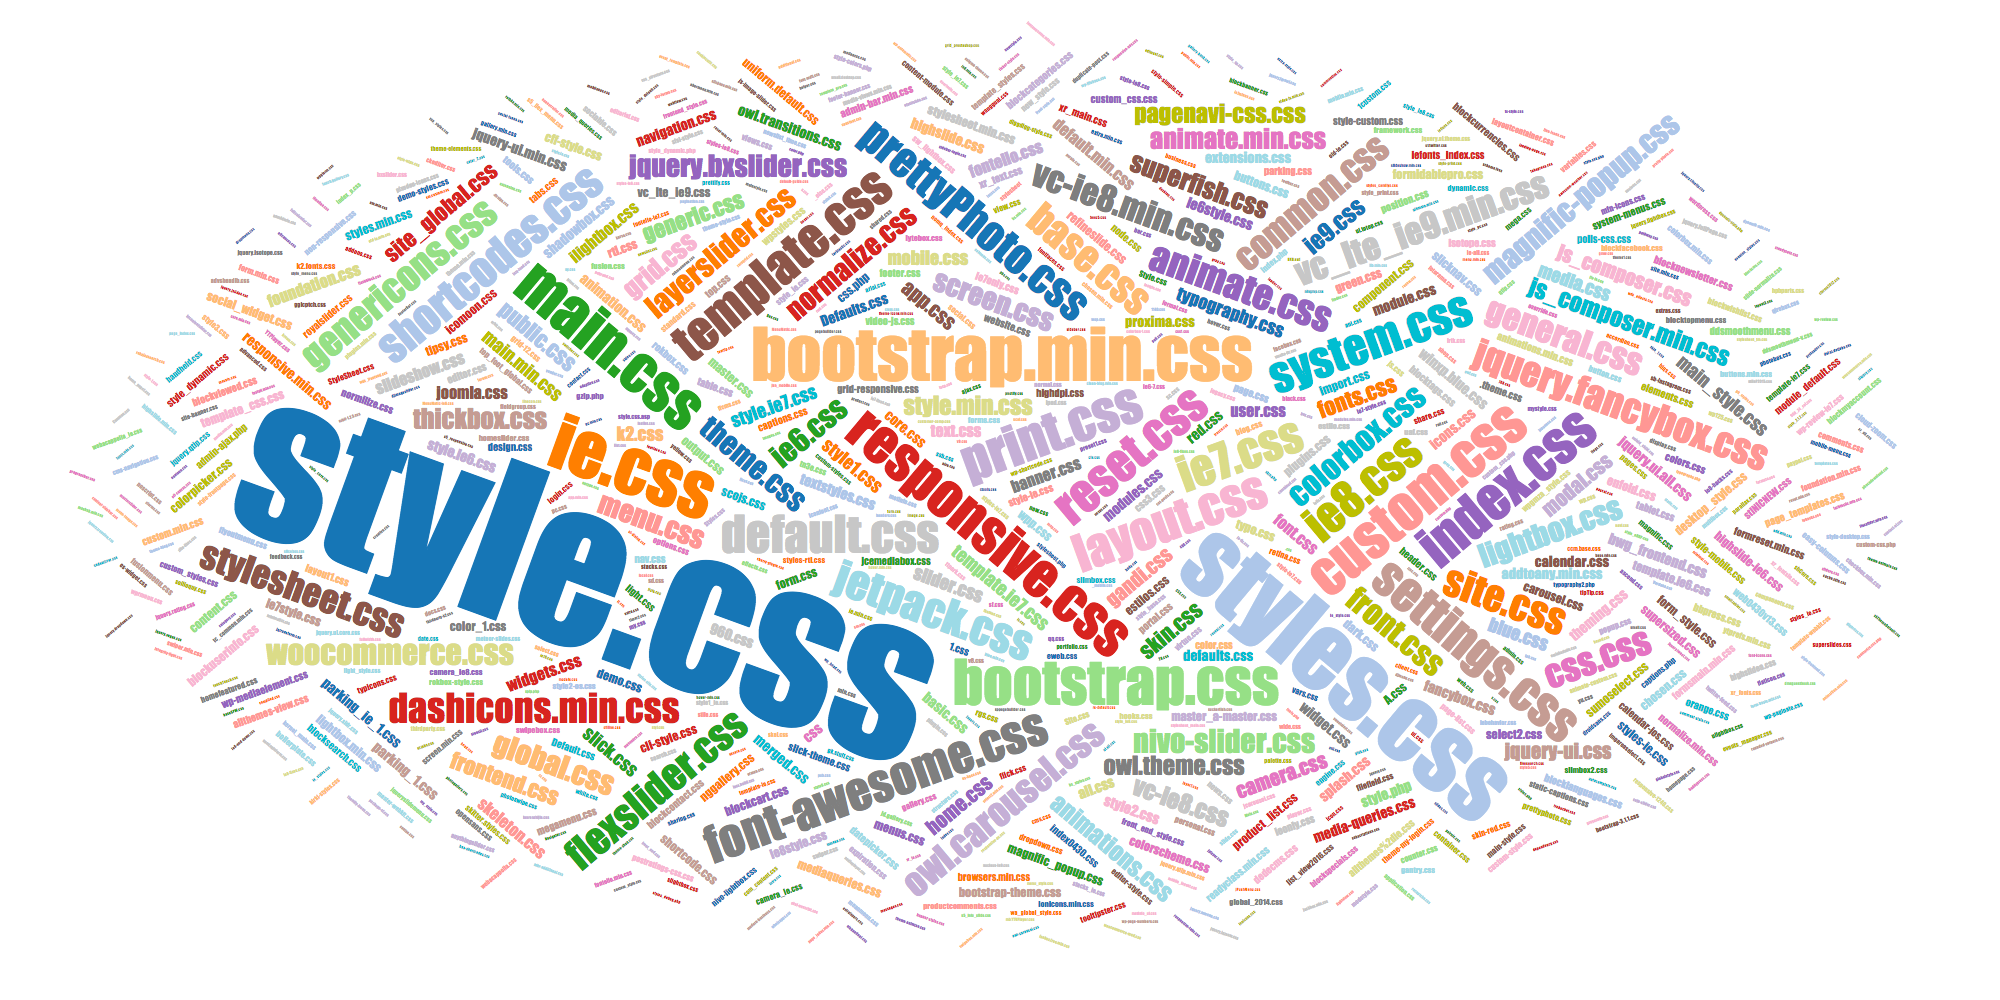 Popular names of CSS files pages_v3b.css, print.css, etc.